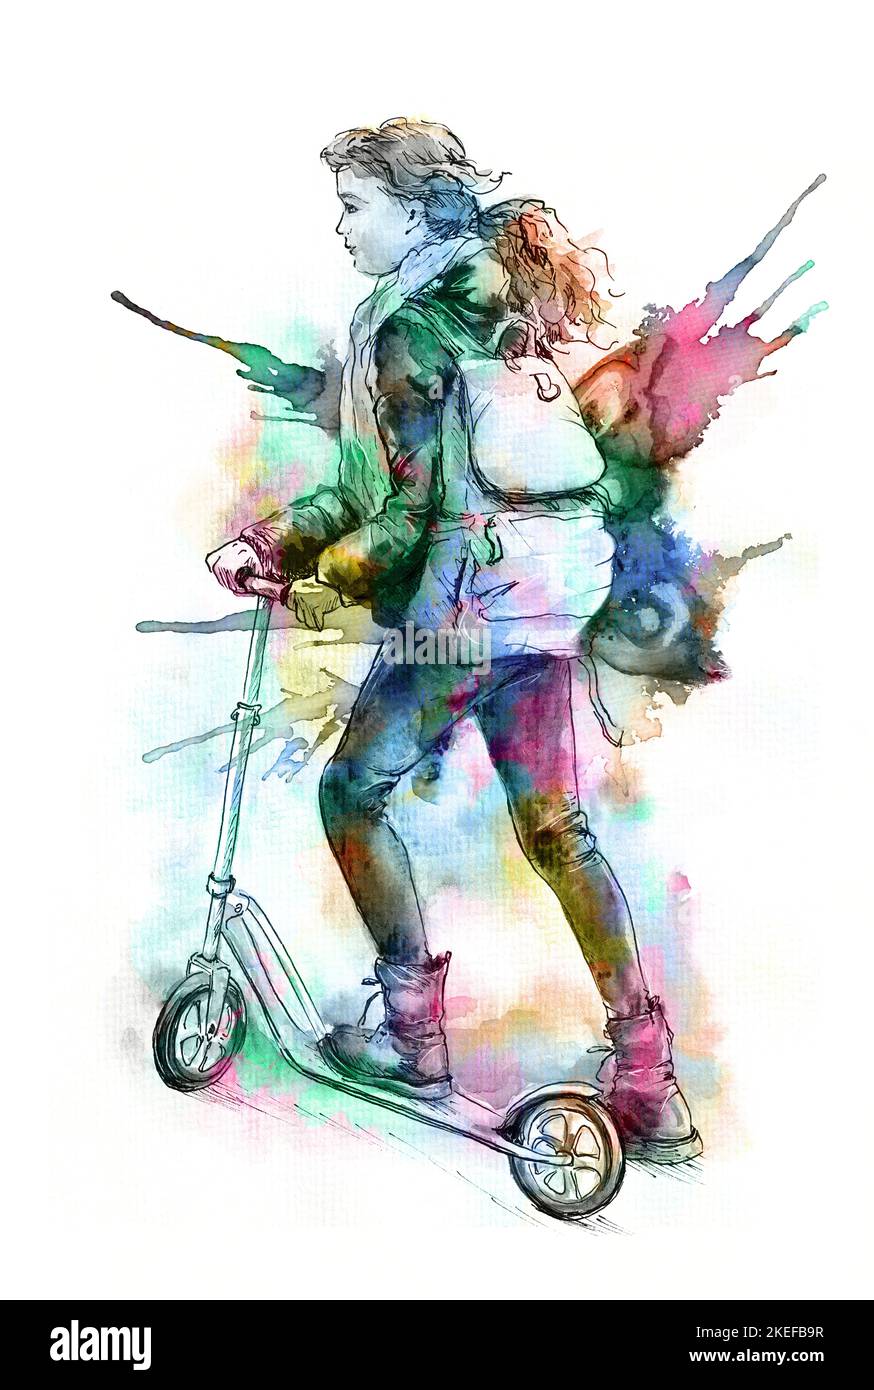 Girl riding scooter to school. Hand drawn watercolour illustration in grunge technique with runny paints. Isolated on white background. Stock Photo